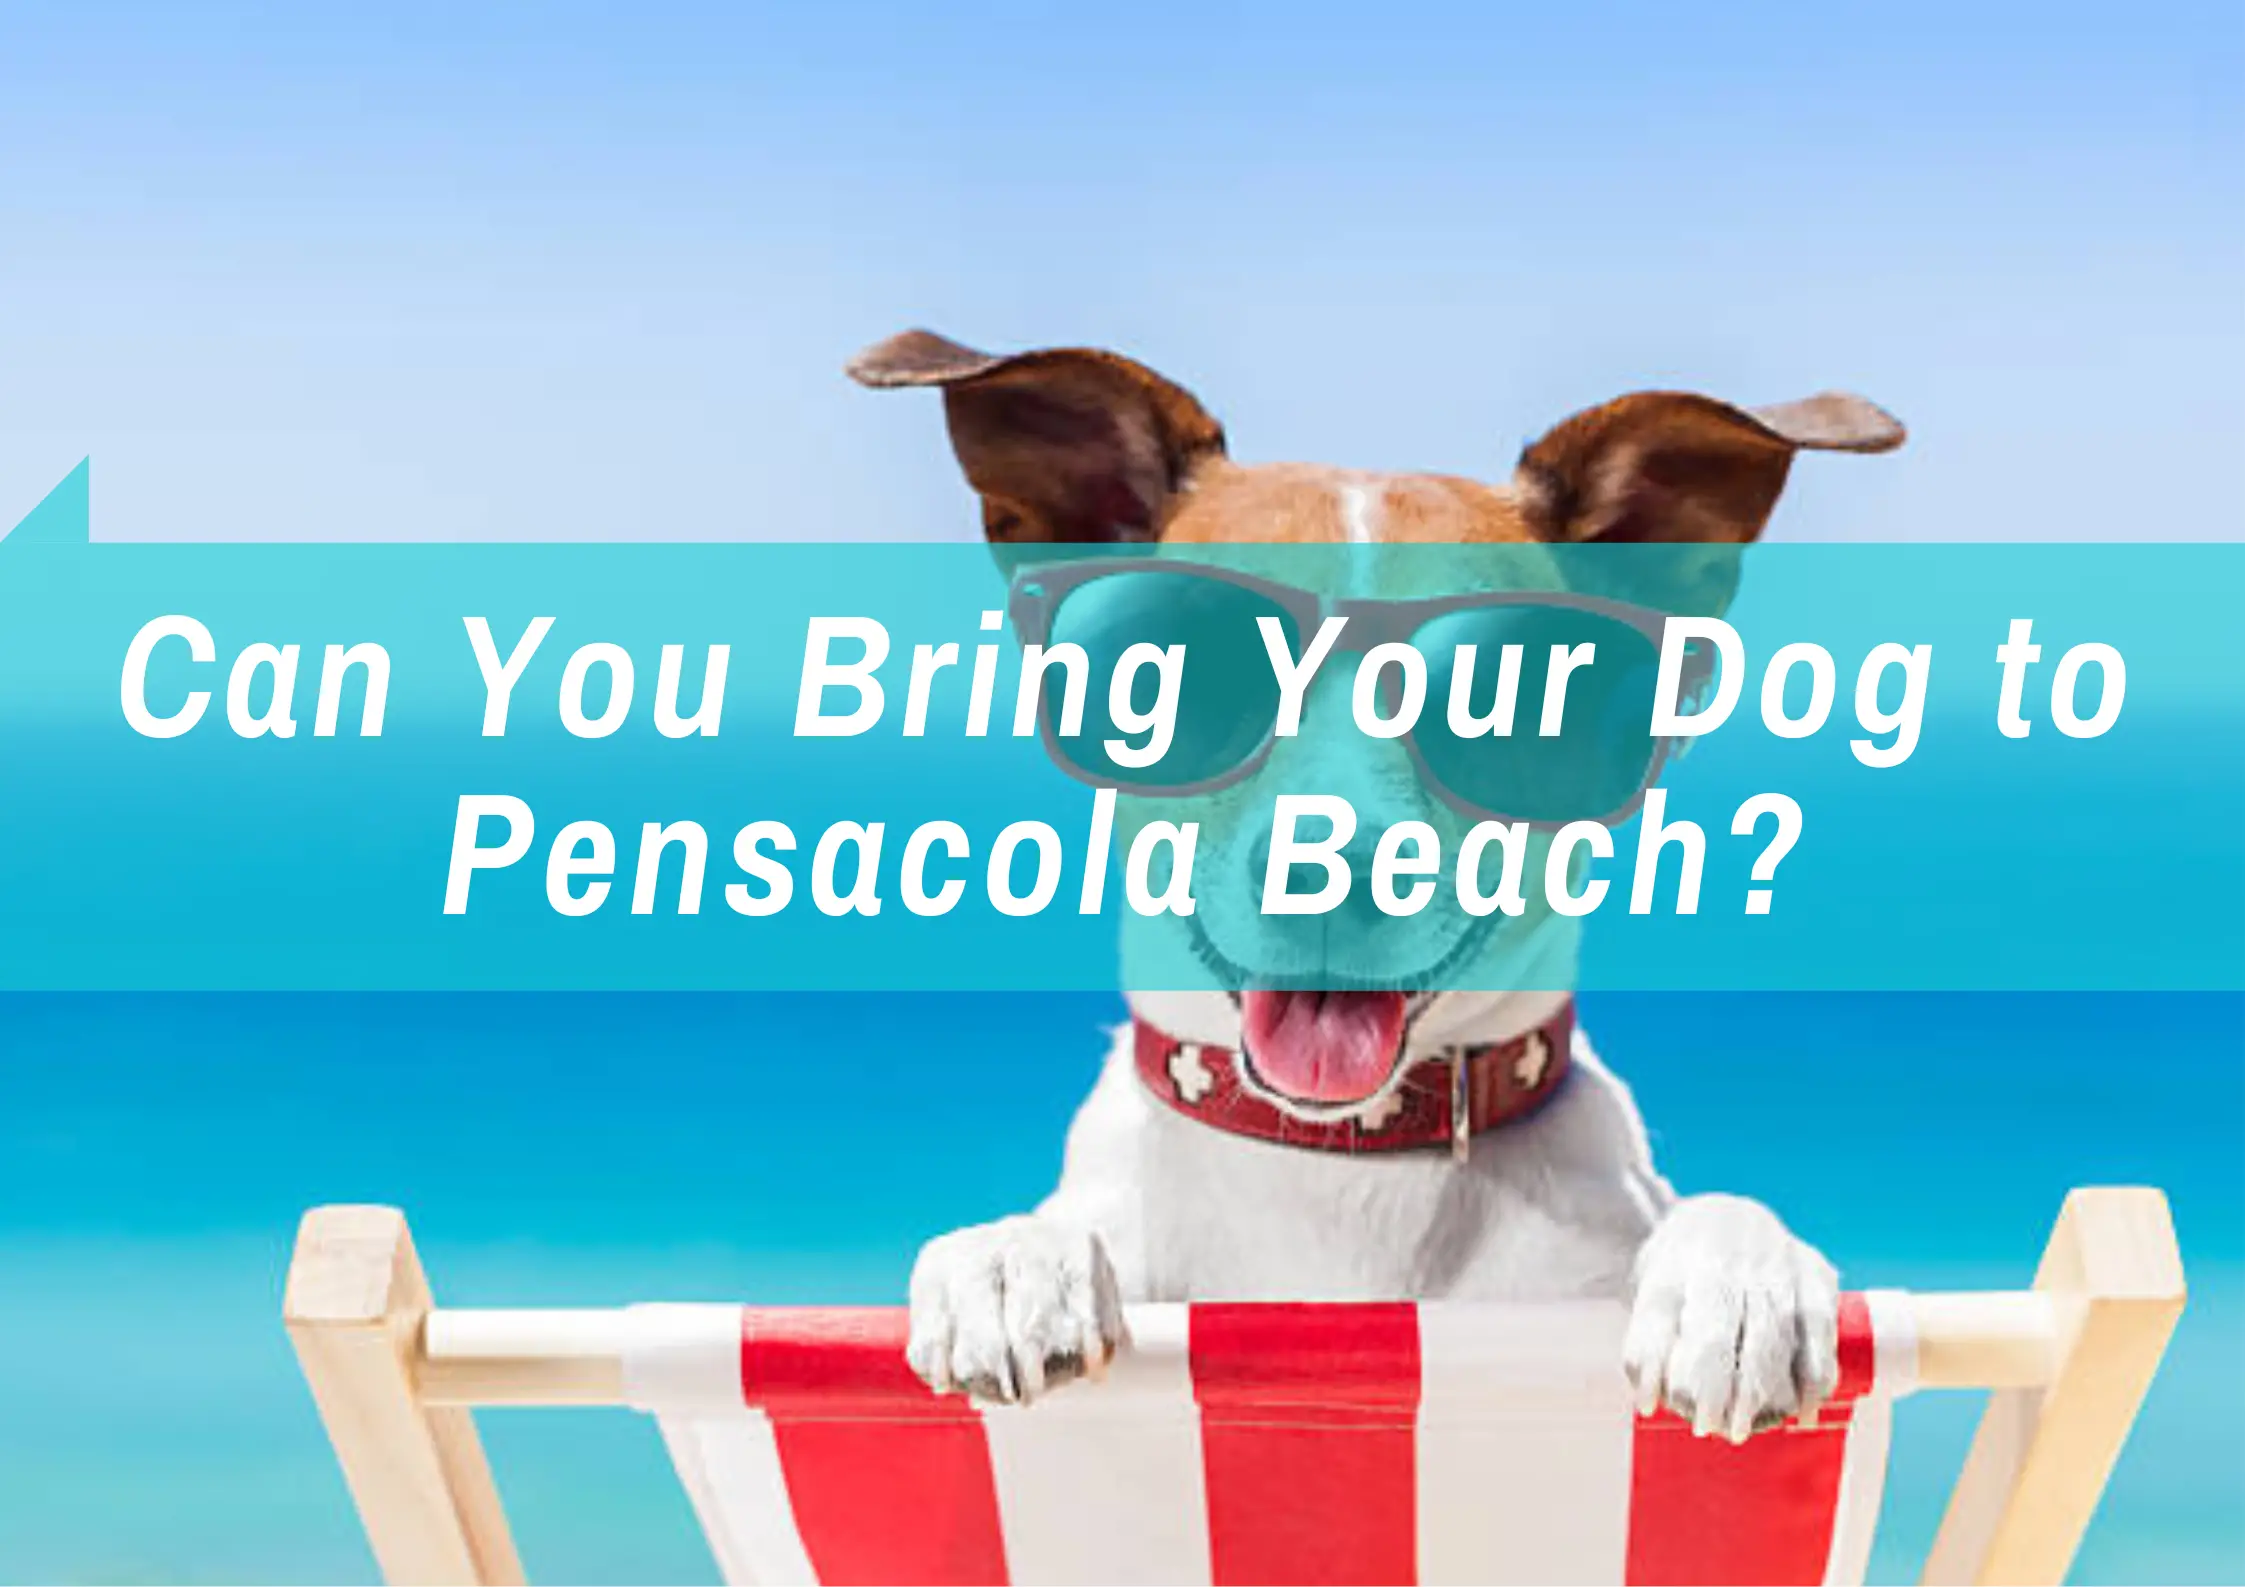 Will Your Dog Be Allowed on Pensacola Beach?